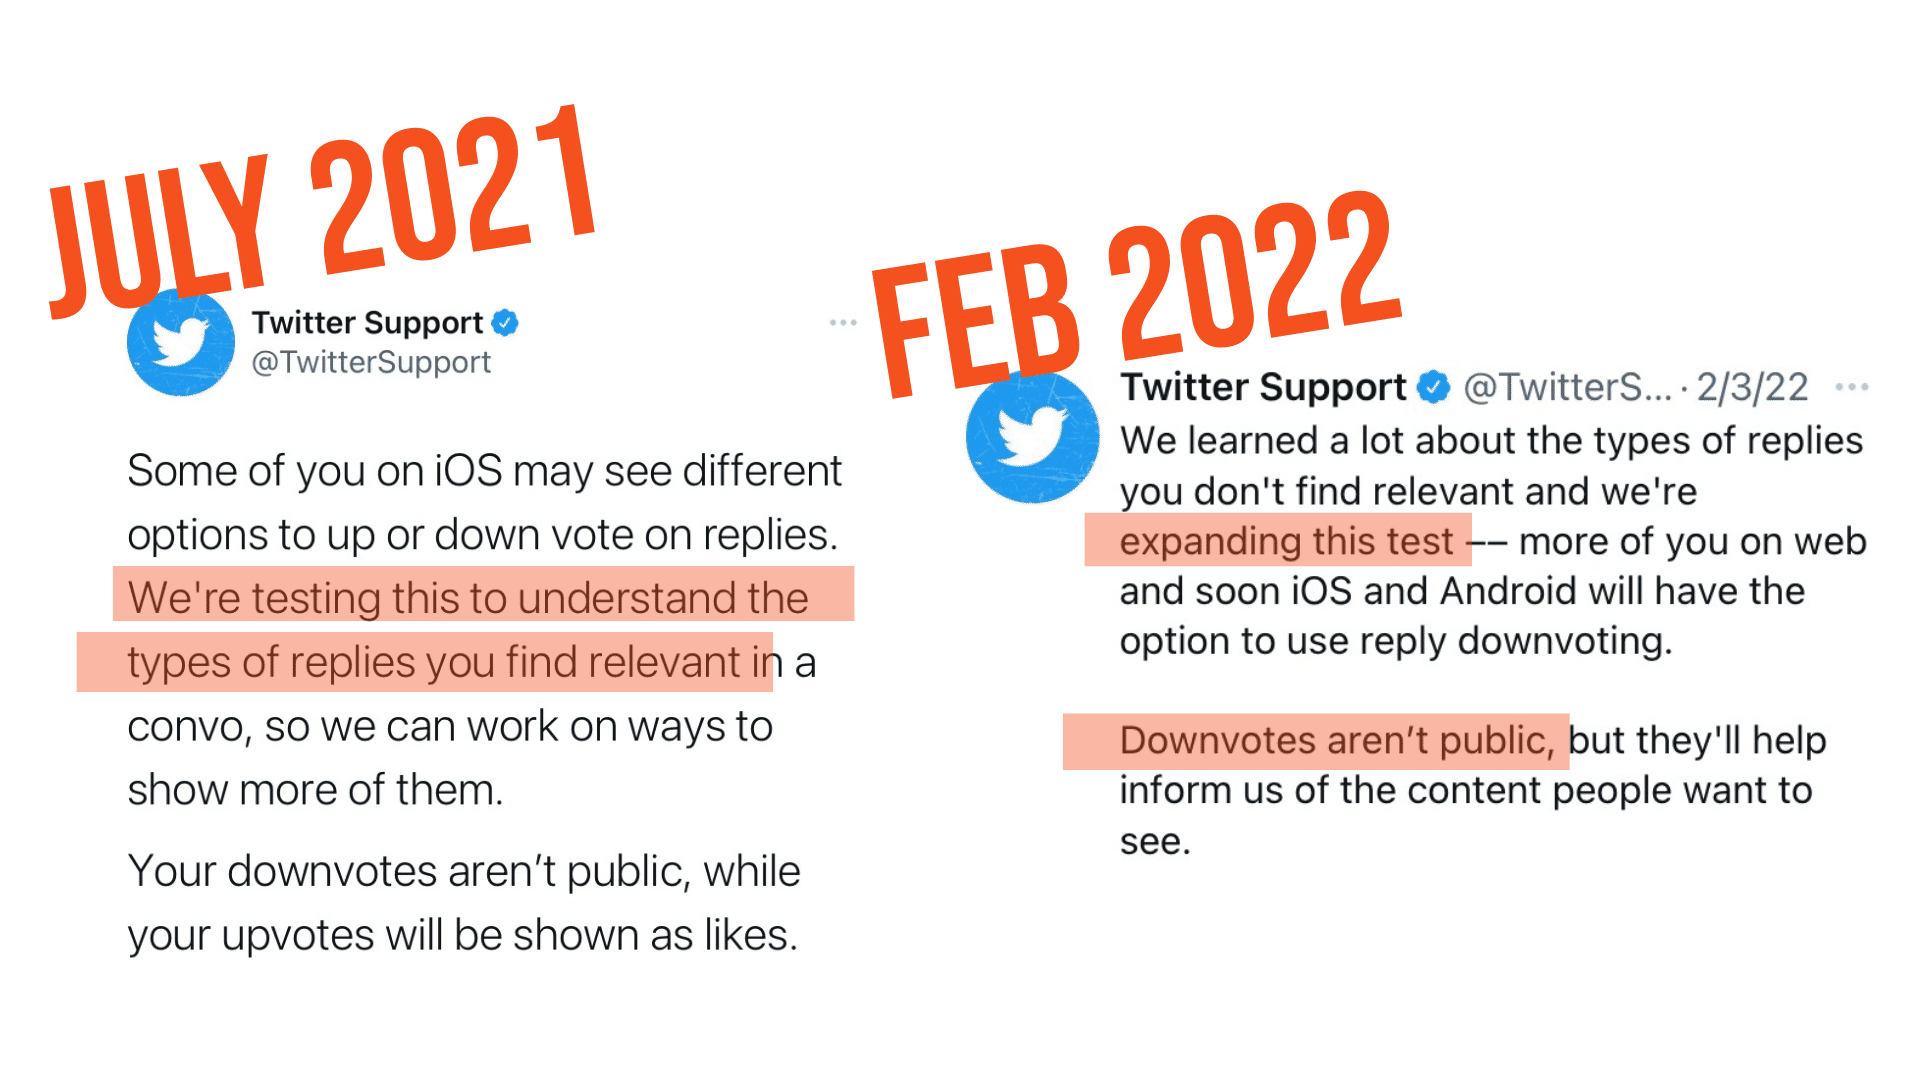 A TwitterSupport tweet from July 2021 reads: Some of you on iOS may see different options to go up or down vote on replies. We're testing this to understand the type of replies you find relevant in a convo, so we can work in ways to show more of them. Your downvotes aren't public, while your upvotes will be shown as likes. The tweet on the right is from TwitterSupport in February 2022. It reads: We learned a lot about the types of replies you don't find relevant and we're expanding this test—more of you on web and soon iOS and Android will have the option to use reply downvoting. Downvotes aren't public, but they'll help inform us of the content people want to see.